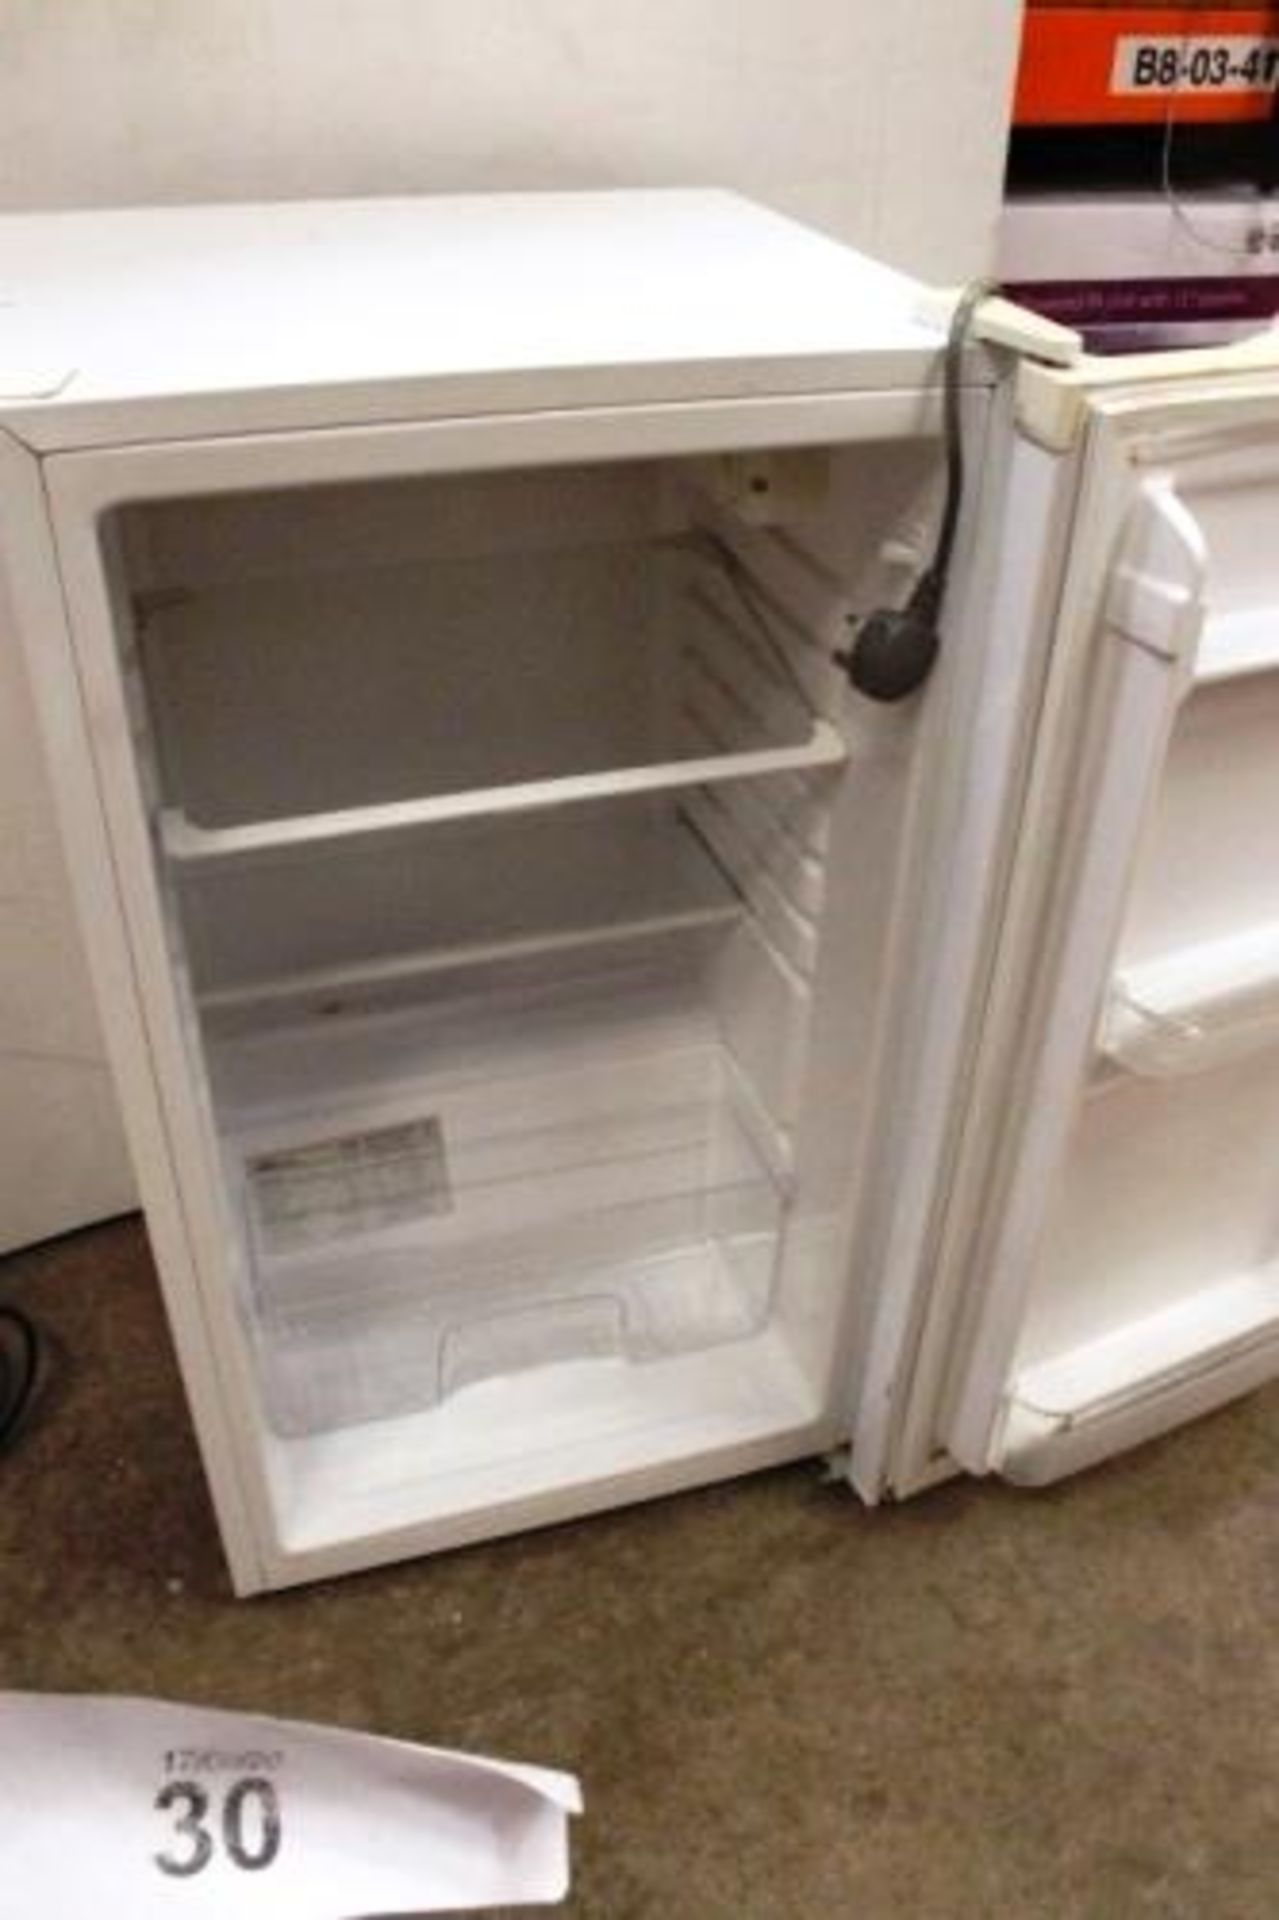 Curry Essential white domestic fridge, 240V, model CUL 48W13 - Second-hand (ES17) - Image 2 of 3